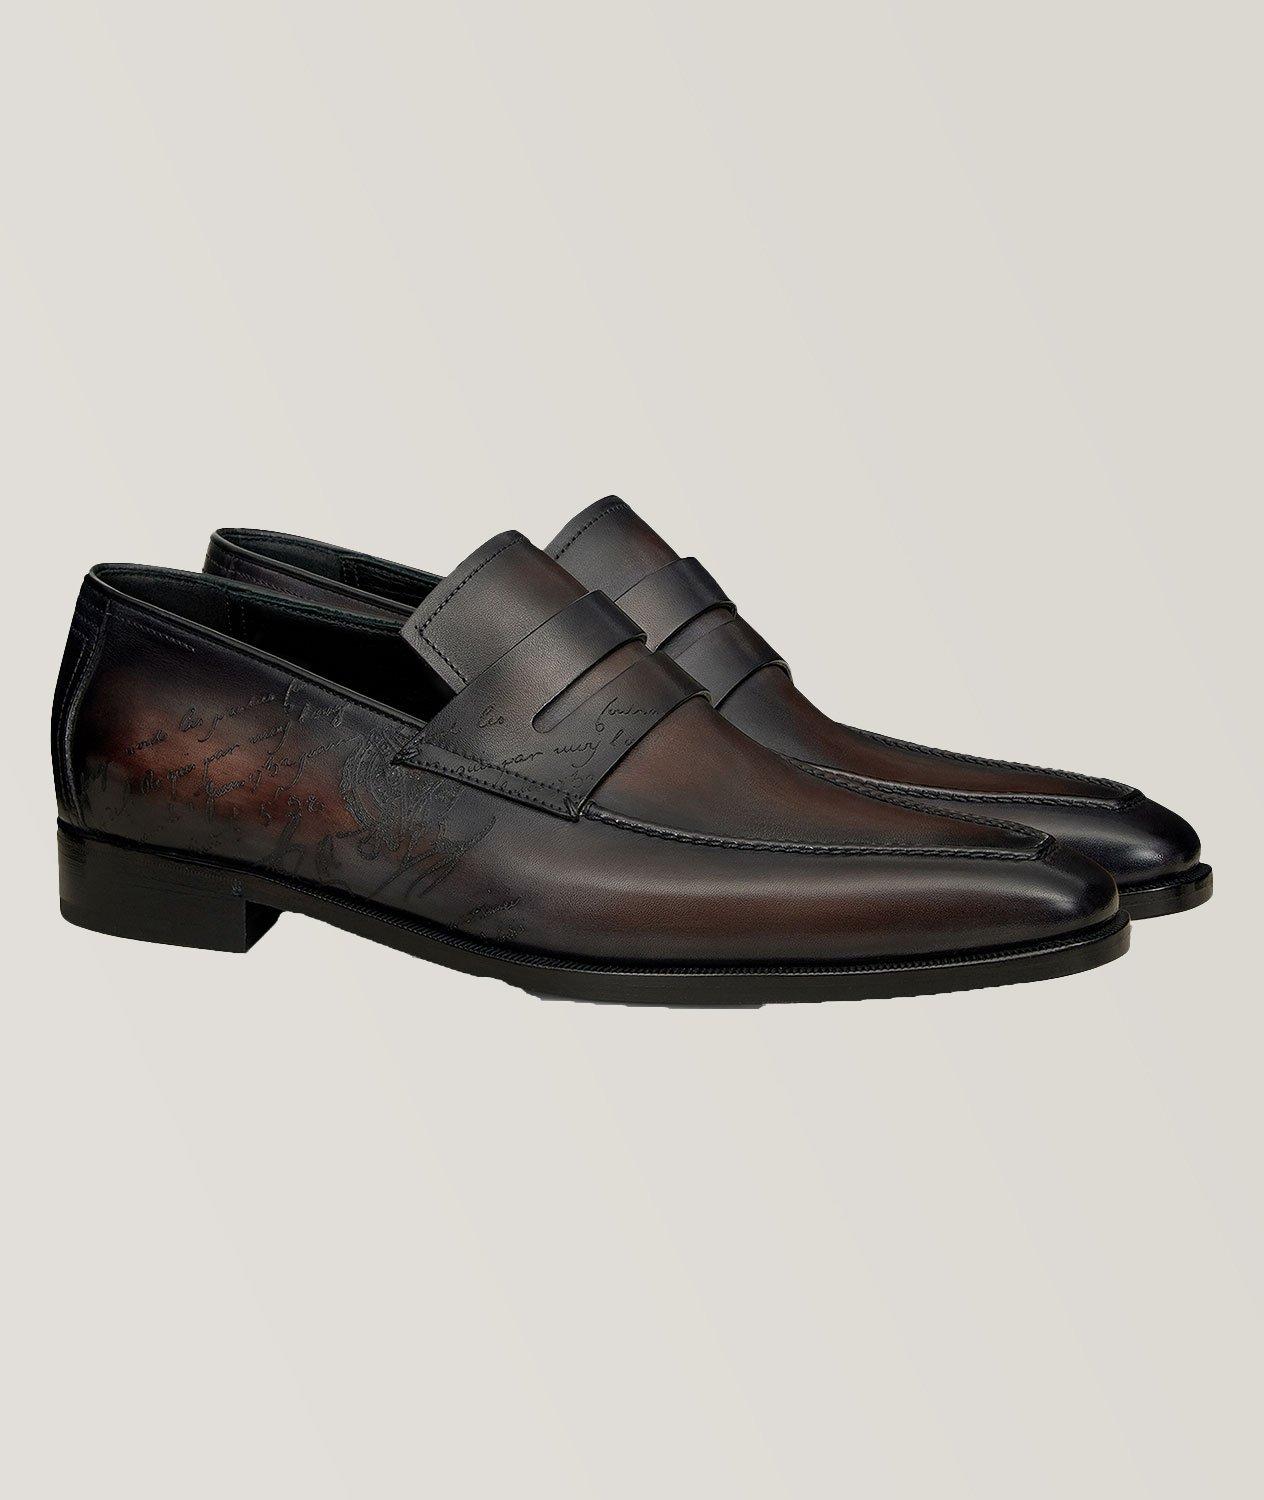 Andy Demesure Scritto Leather Loafer image 1